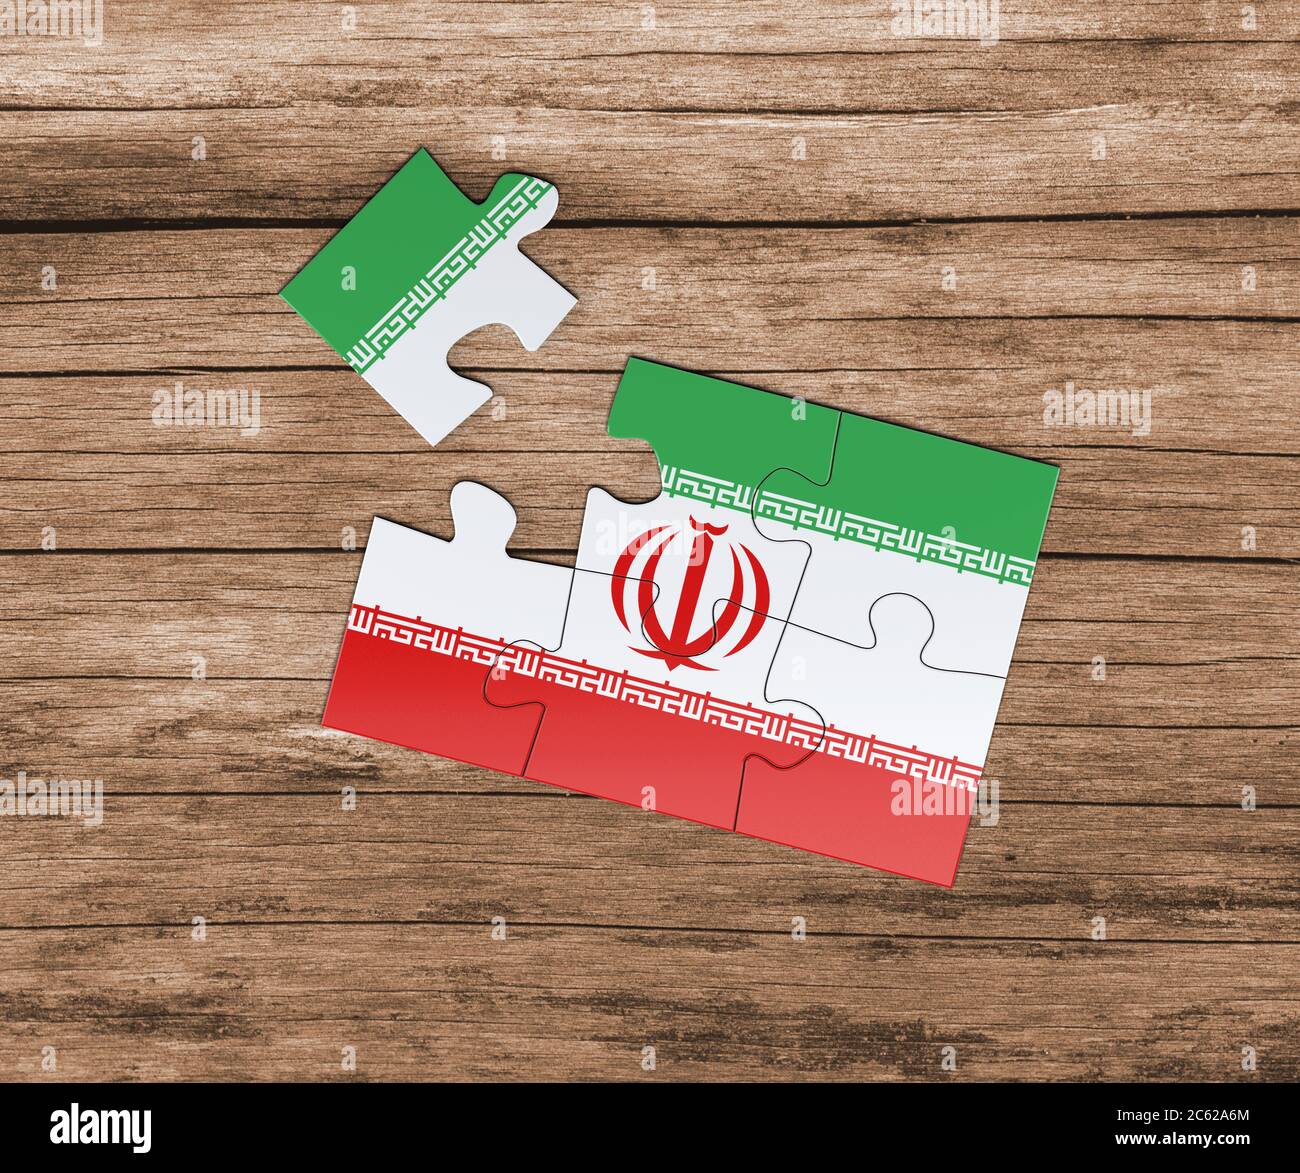 Iran national flag on jigsaw puzzle. One piece is missing. Danger concept  Stock Photo - Alamy